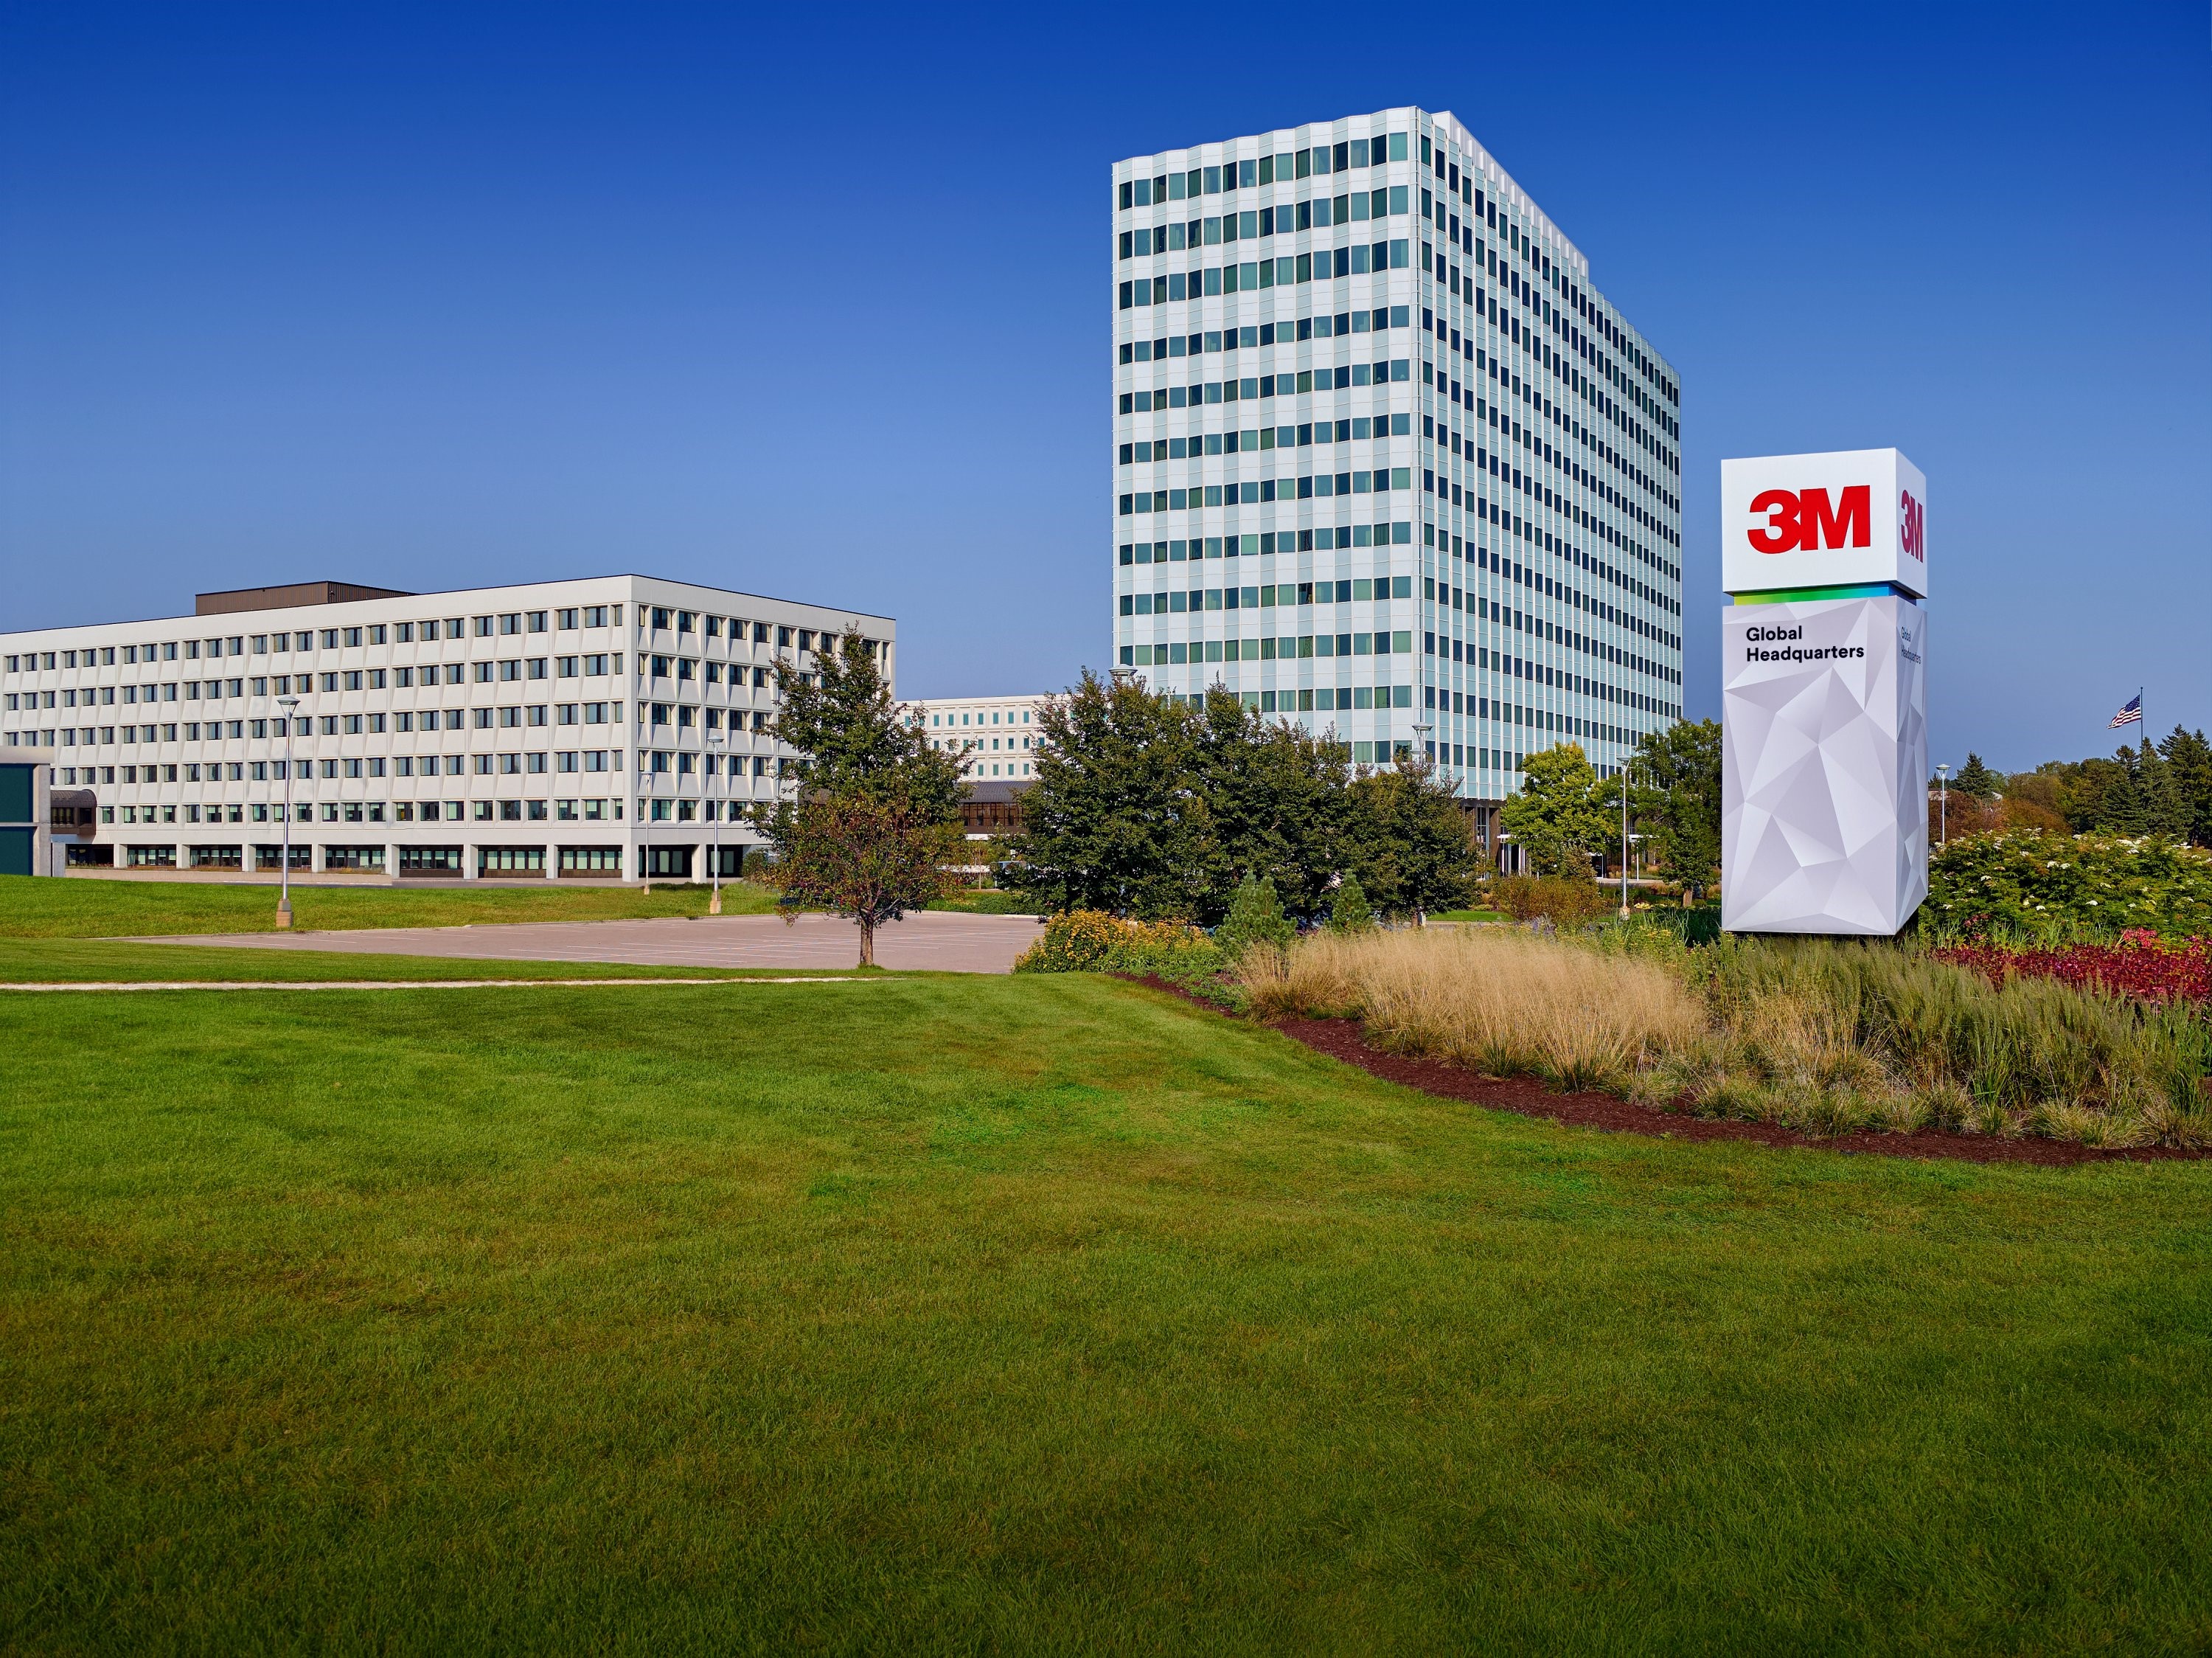 Exterior view of 3M global headquarters and monument sign.